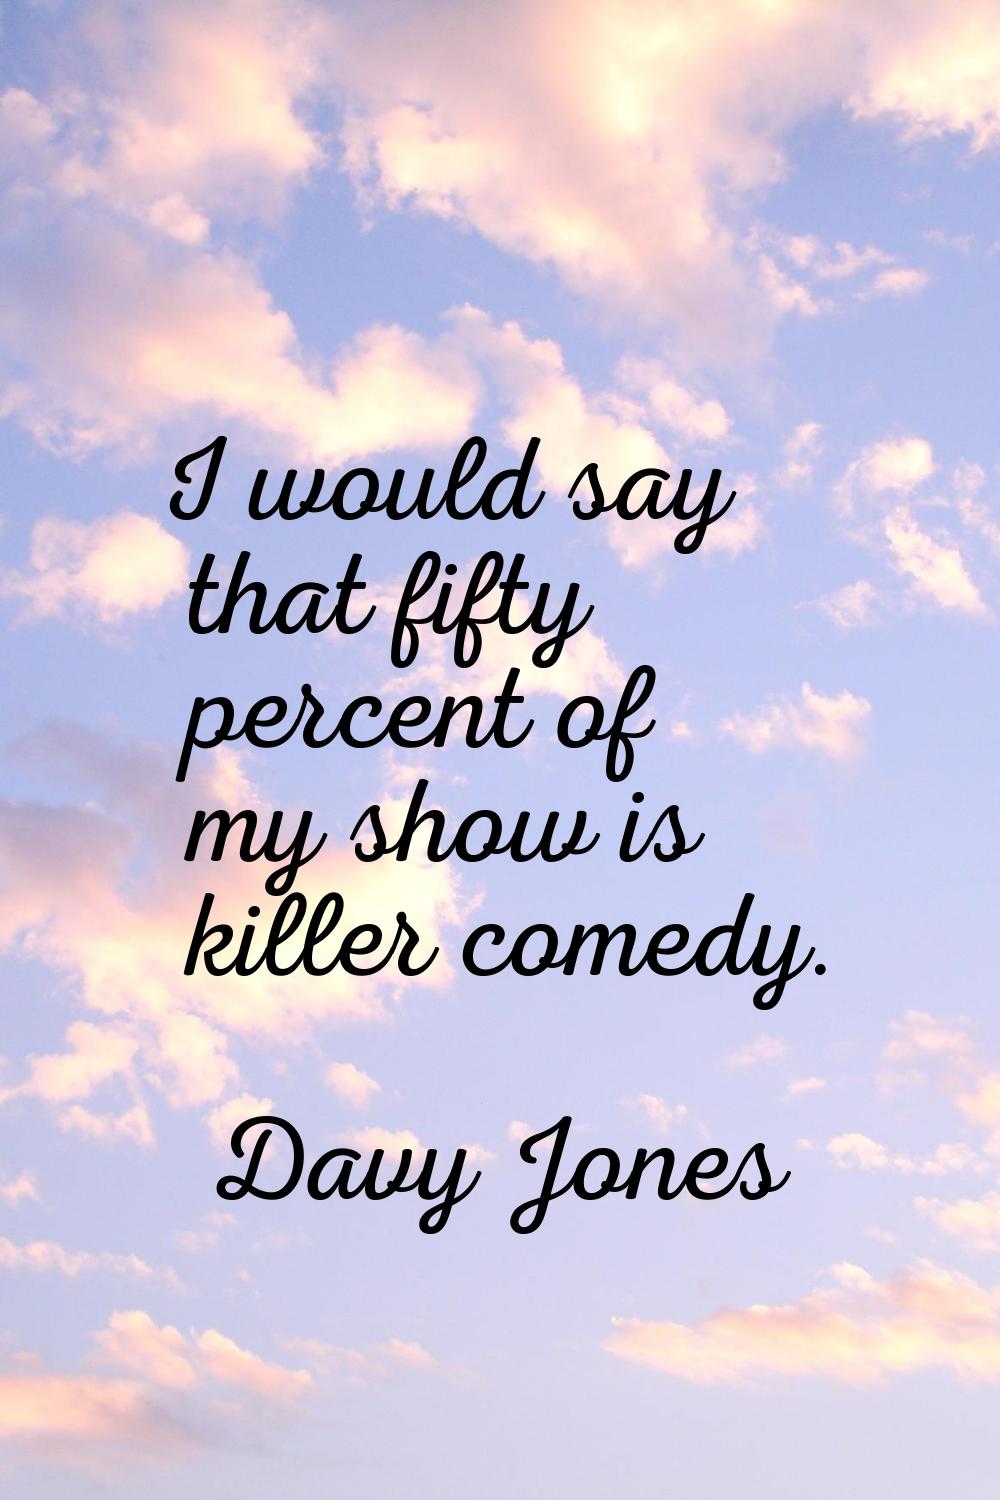 I would say that fifty percent of my show is killer comedy.